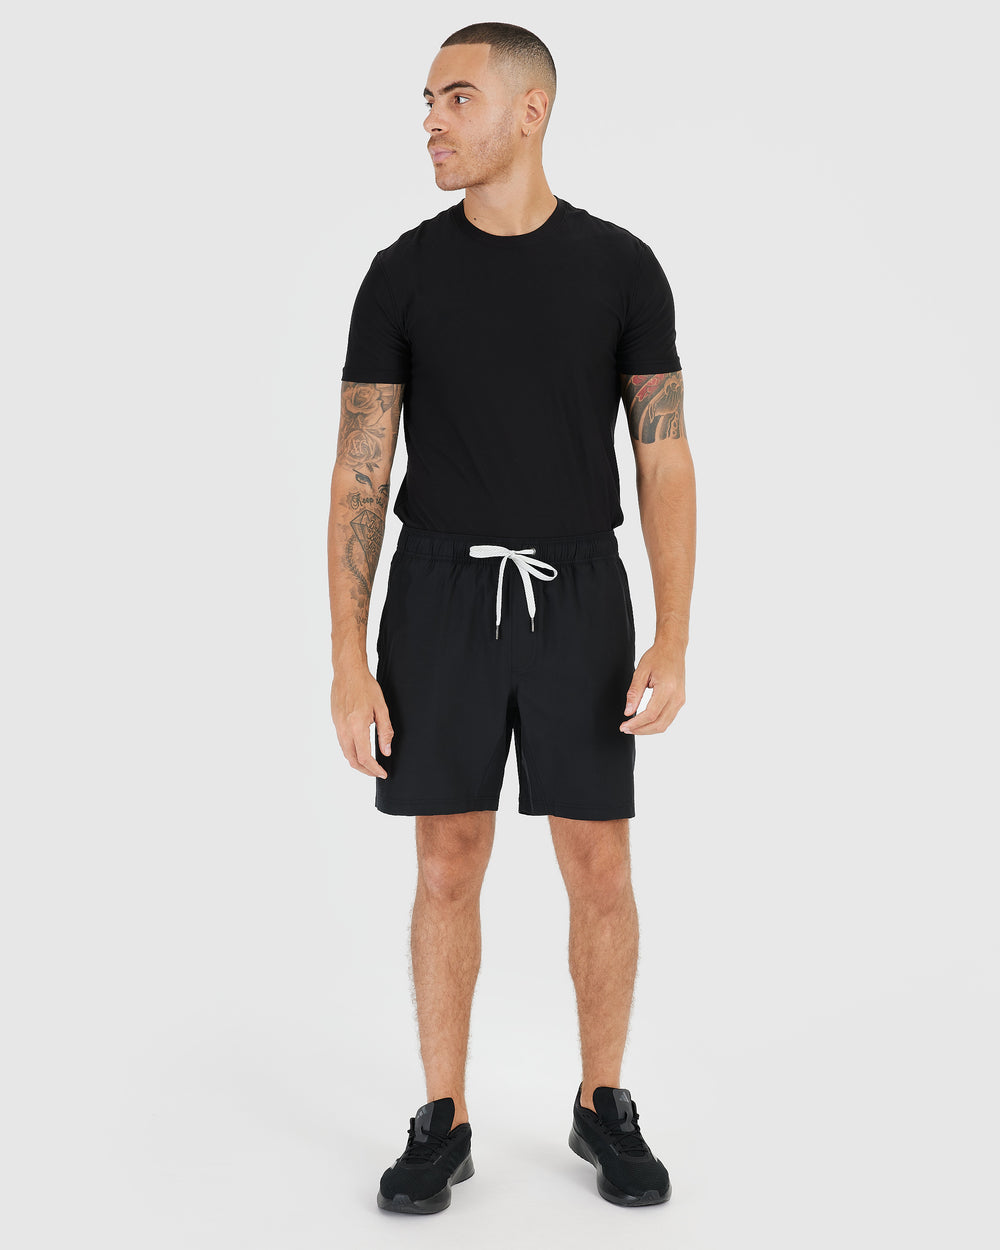 Black Active Quick Dry Short with Liner – True Classic